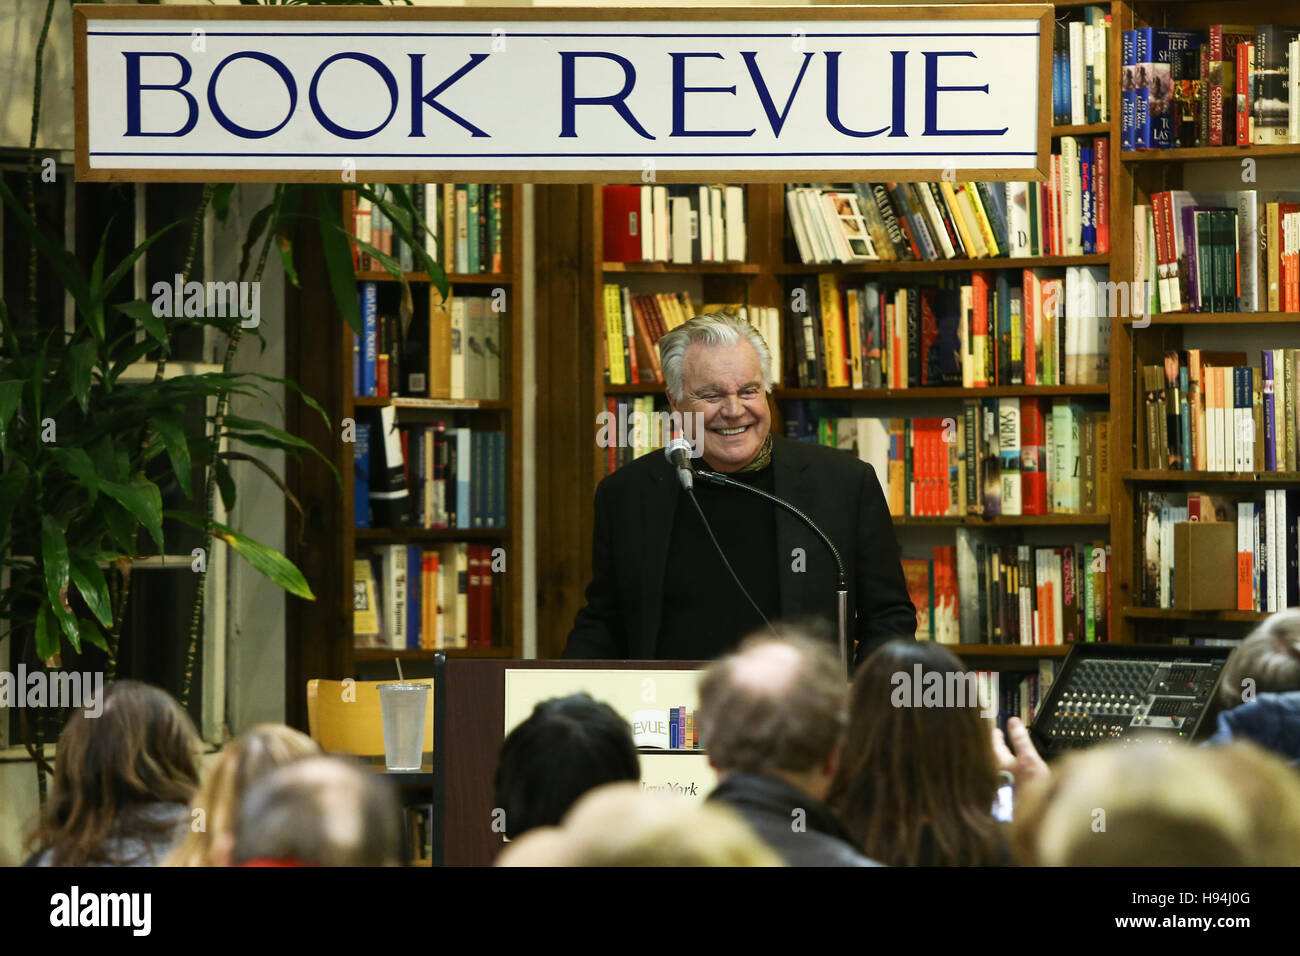 HUNTINGTON-NOV 15: Actor Robert Wagner signs copies of his book "I Loved Her In The Movies" on November 15, 2016 at Book Revue in Huntington, New York Stock Photo